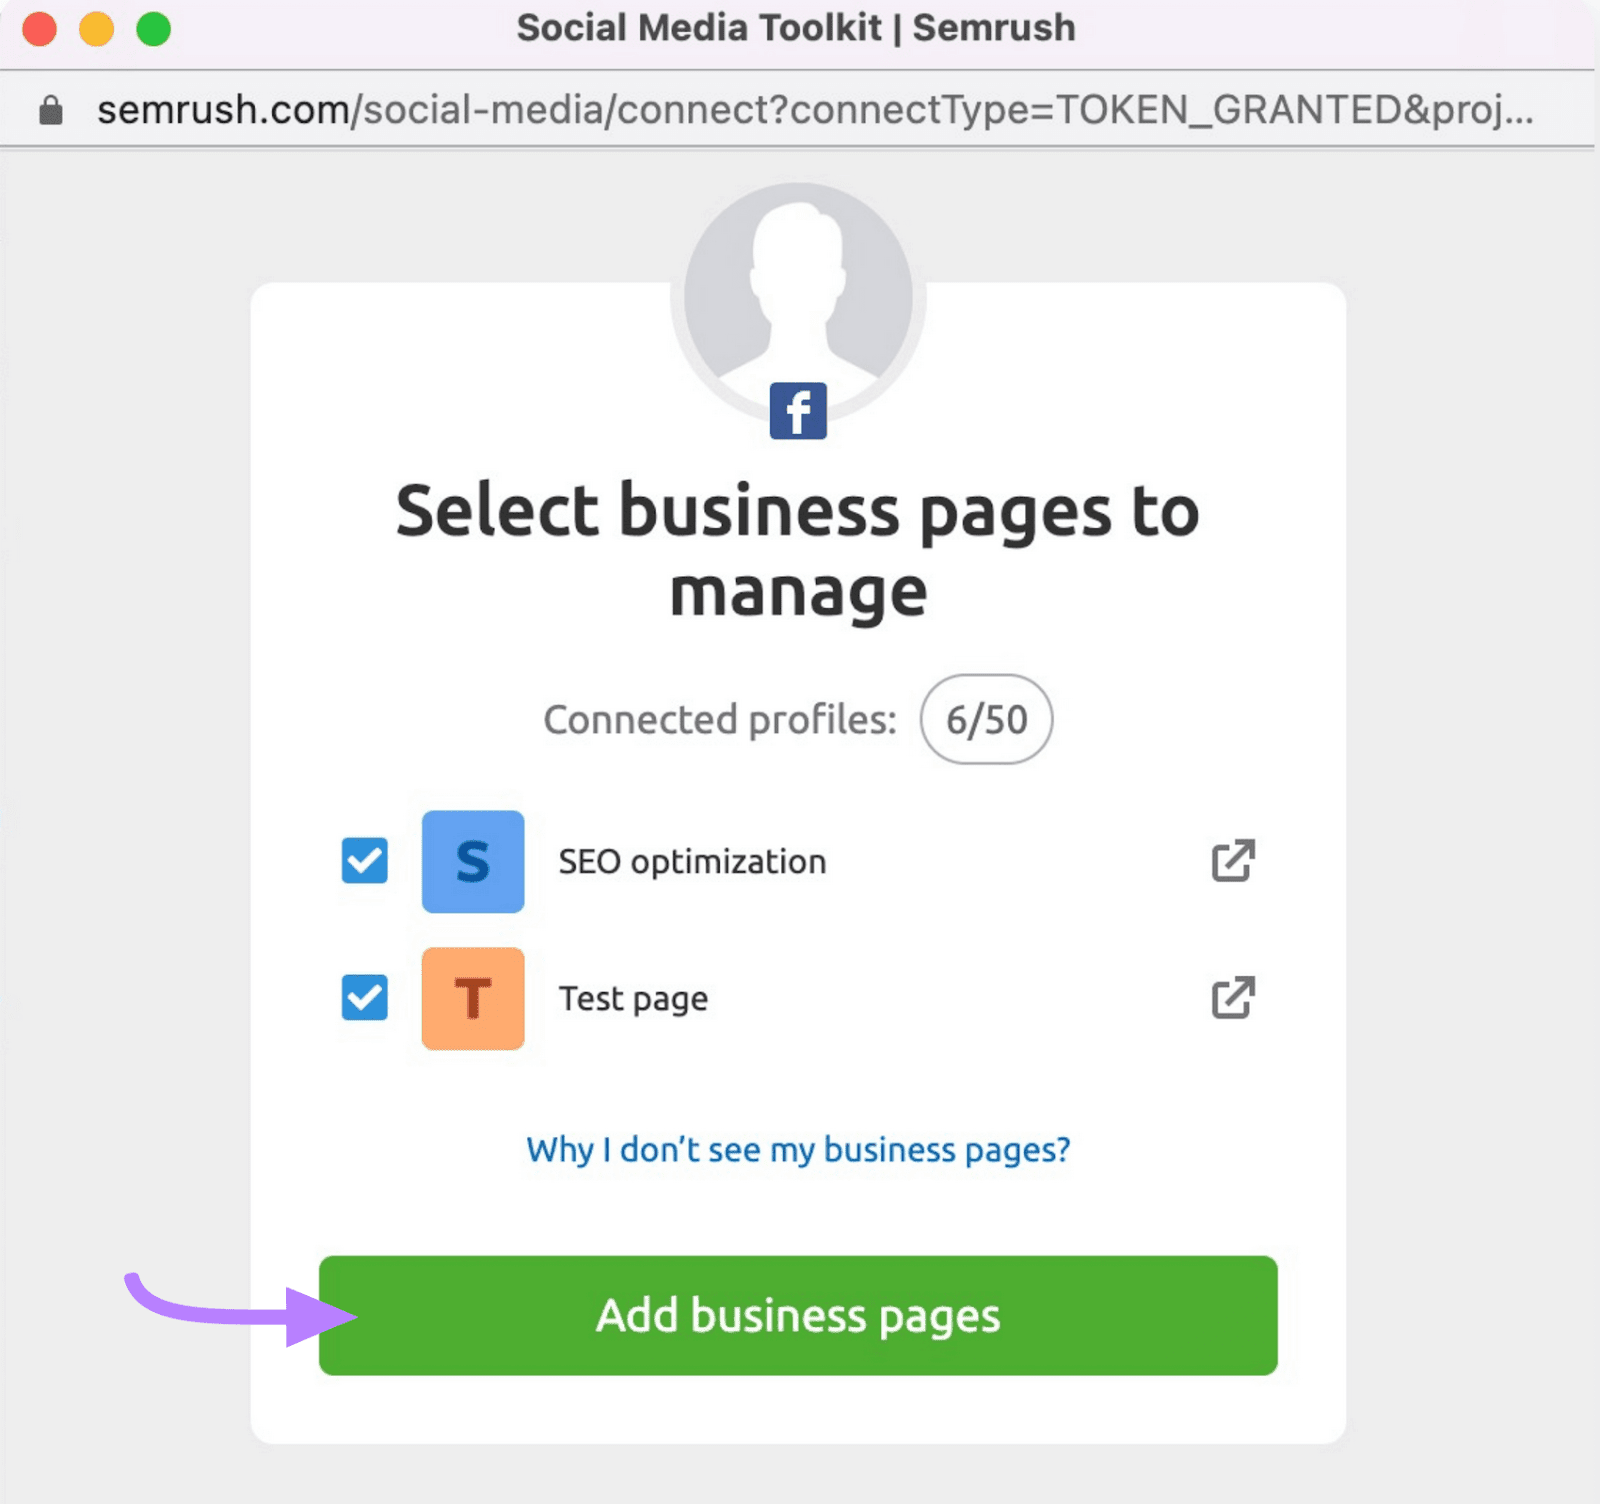 "Select business pages to manage" window